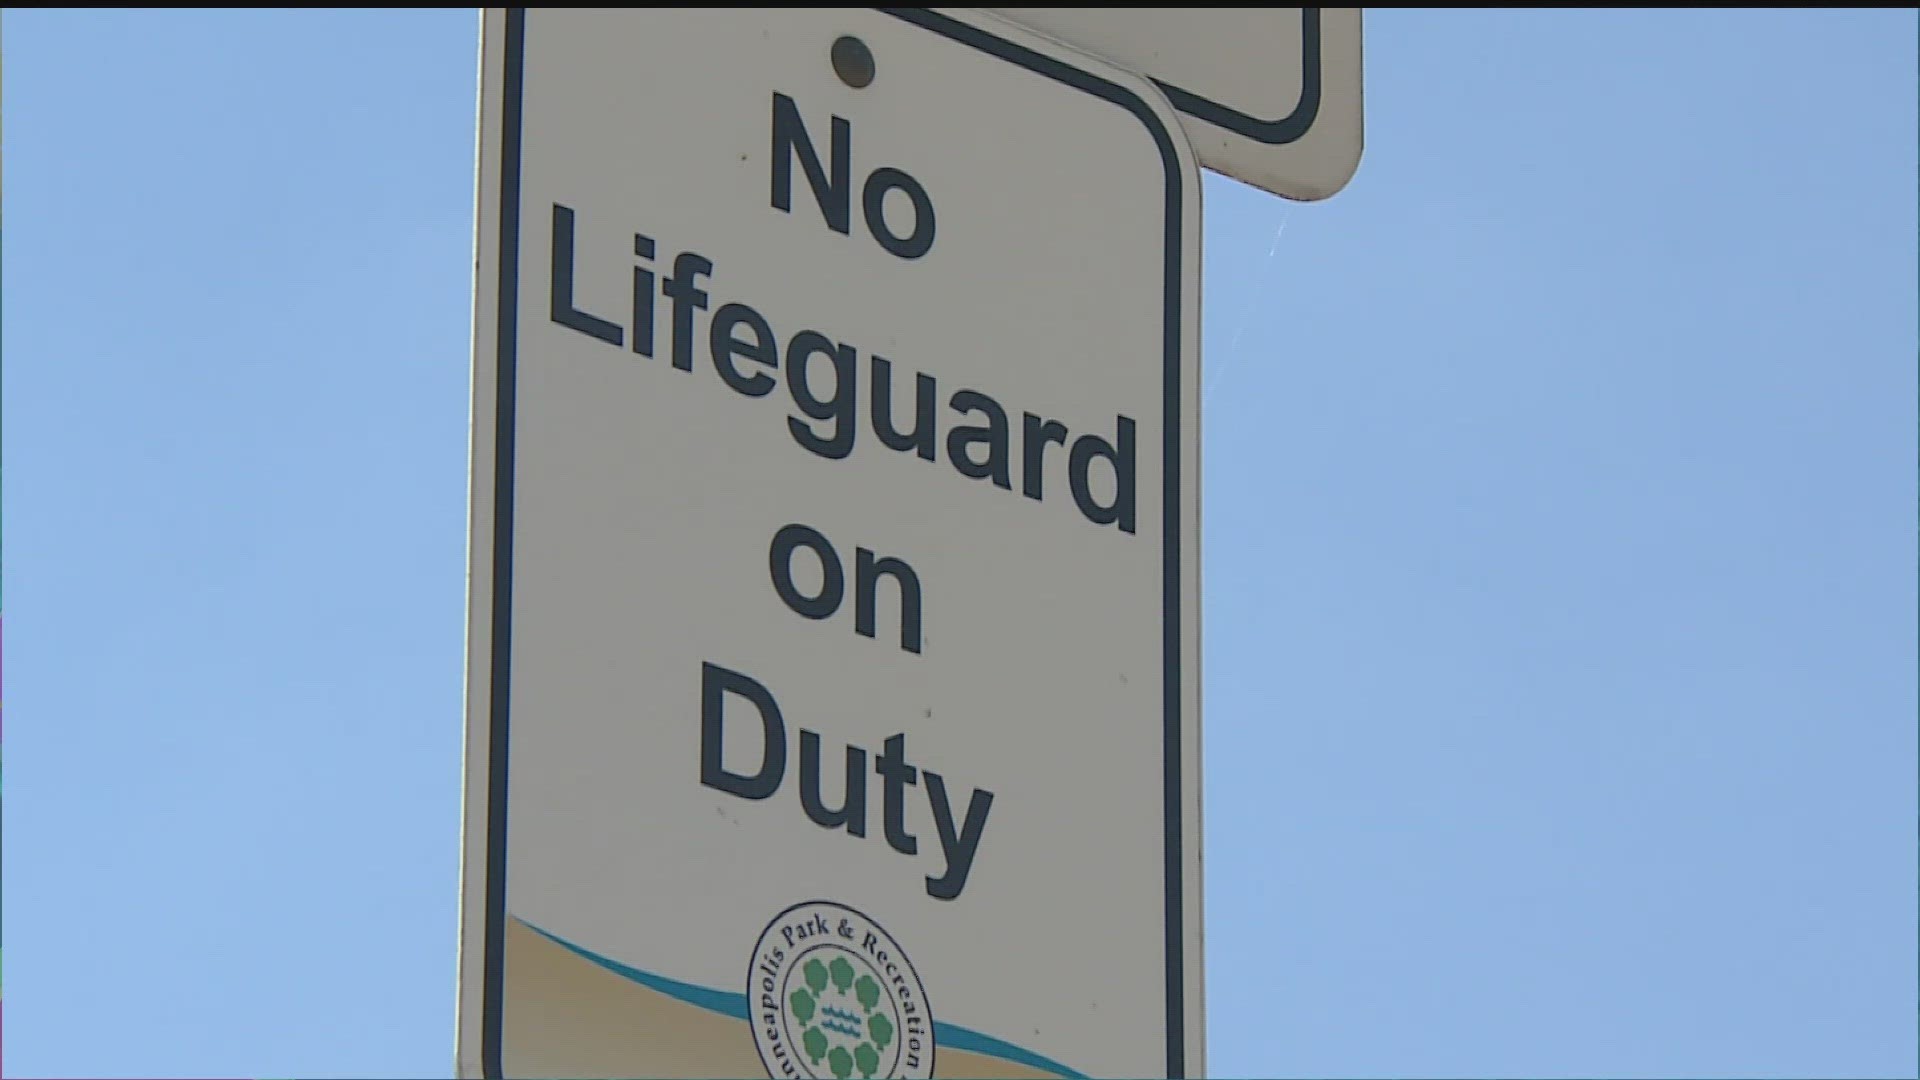 The American Lifeguard Association recommends checking lifeguard staffing at pools and beaches before you visit.